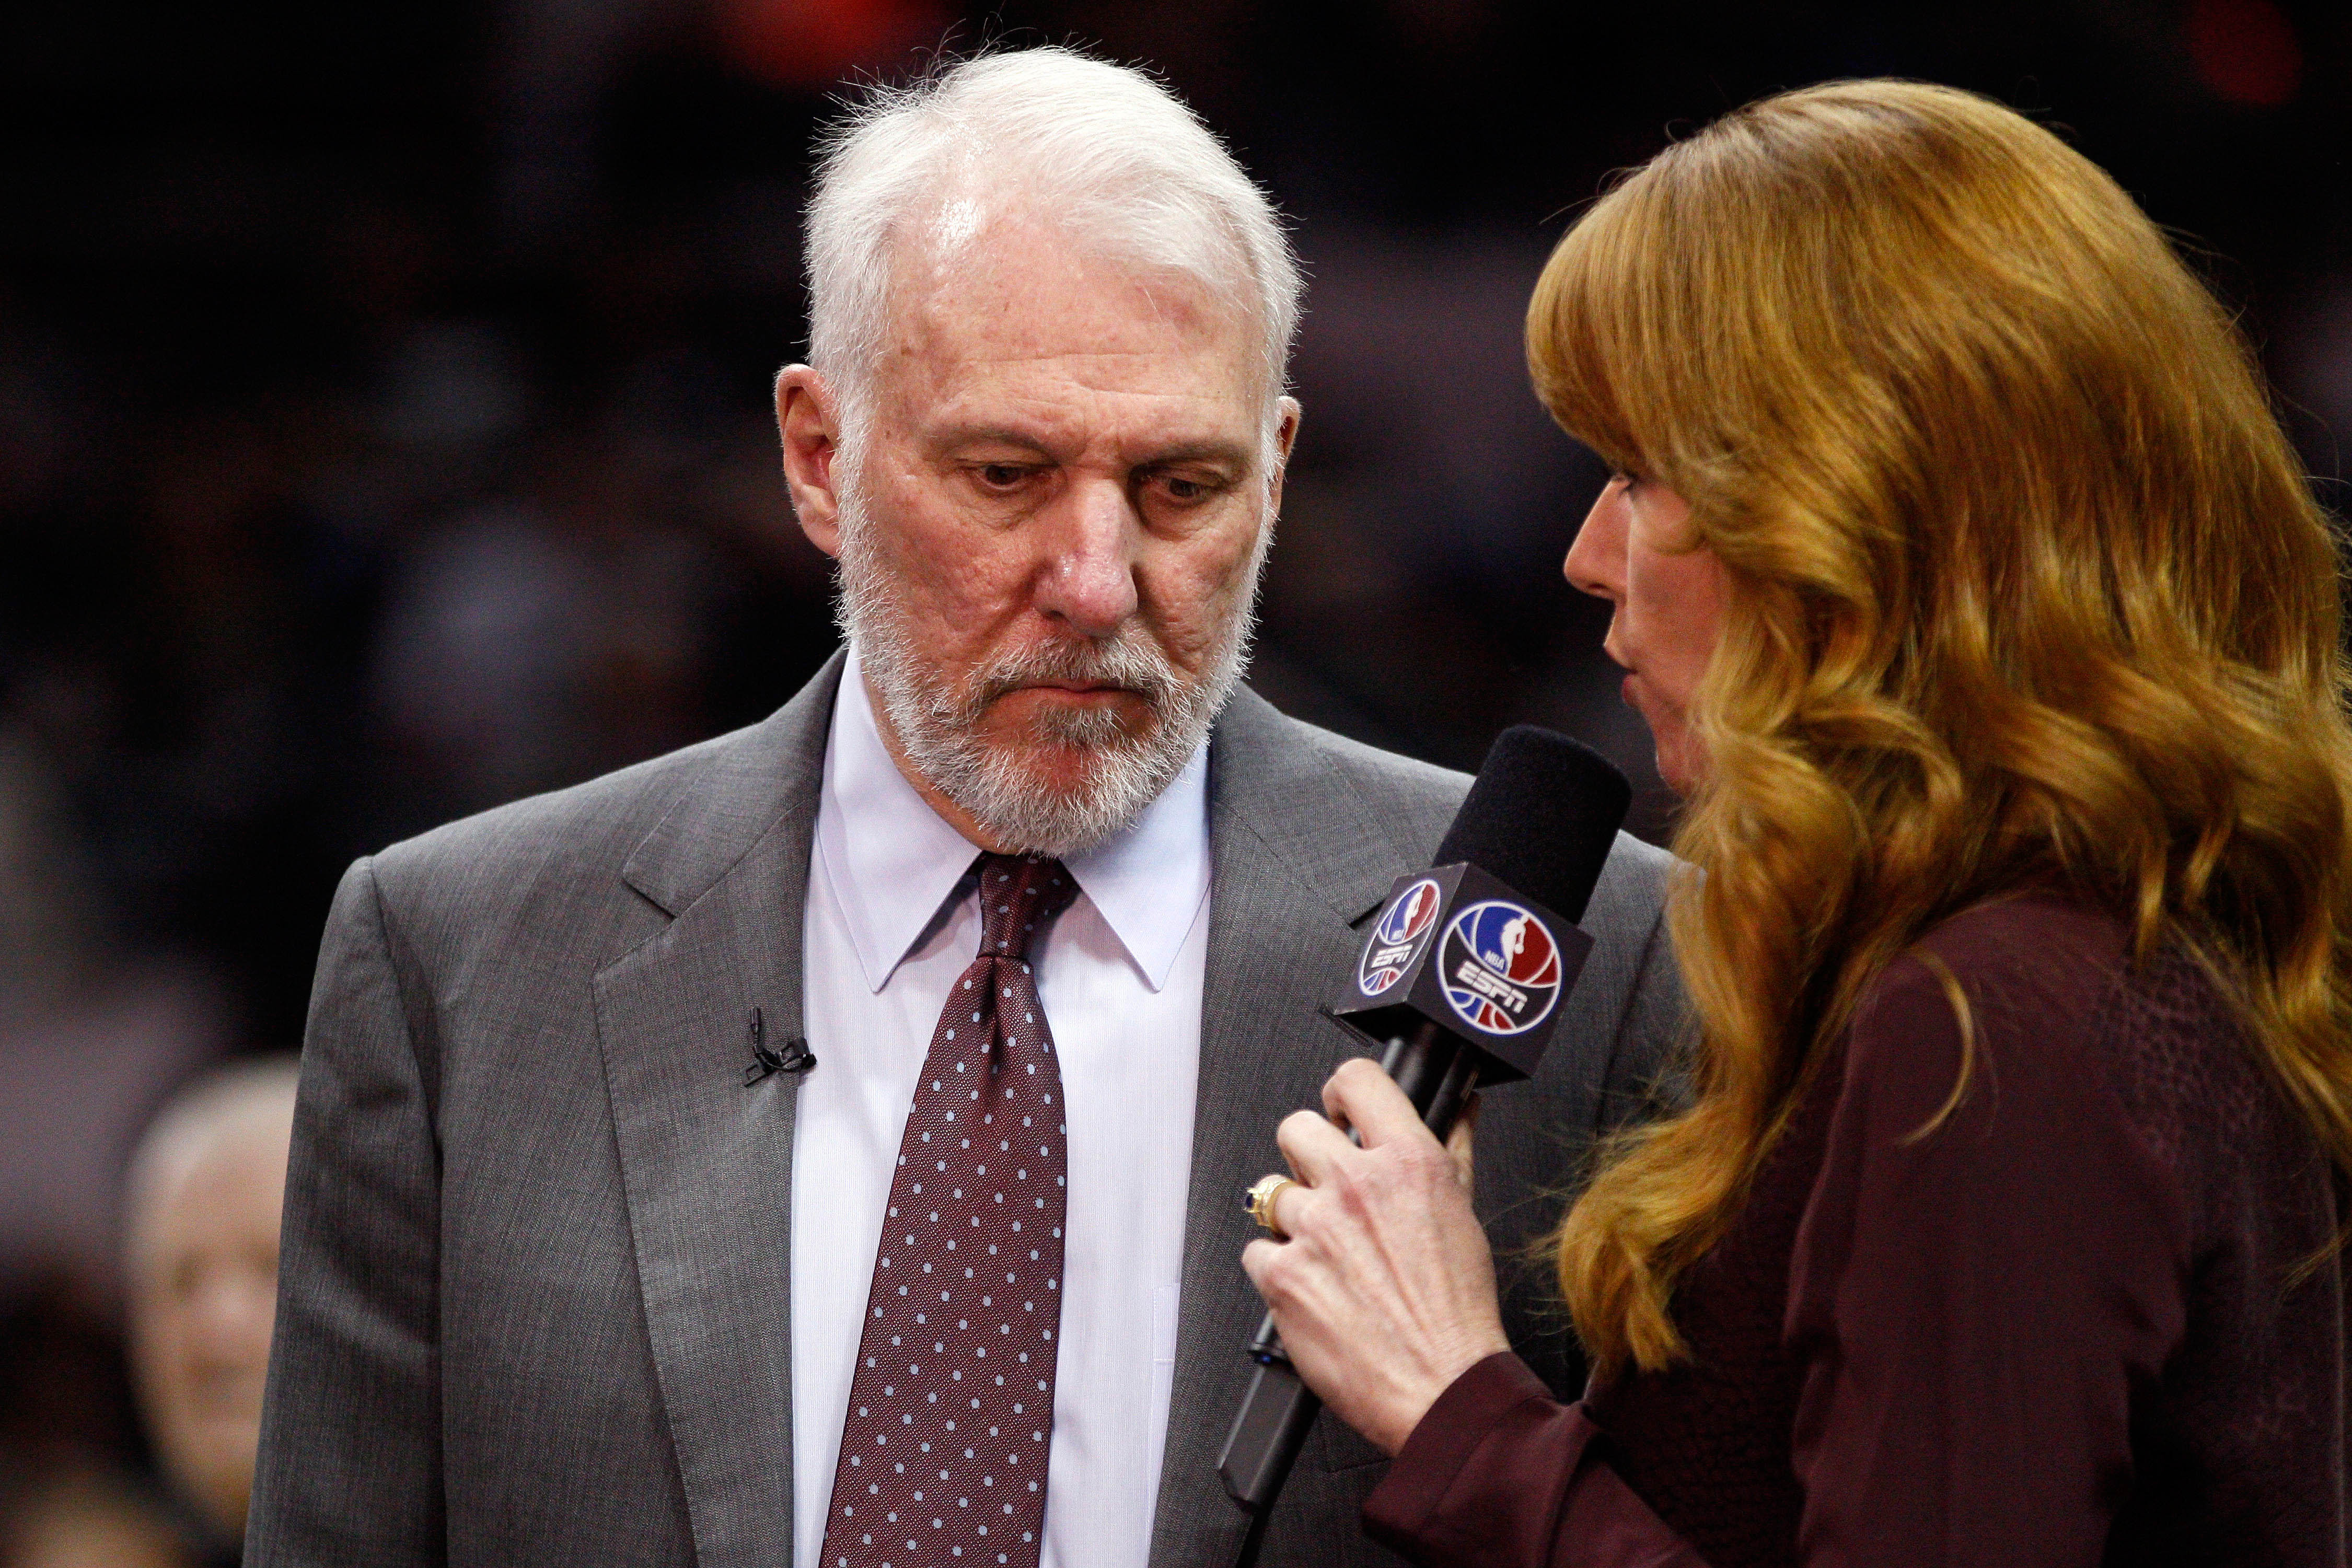 ESPNs Heather Cox (right) interviews Gregg Popovich during a game against the Clippers. (Soobum Im-USA TODAY Sports)